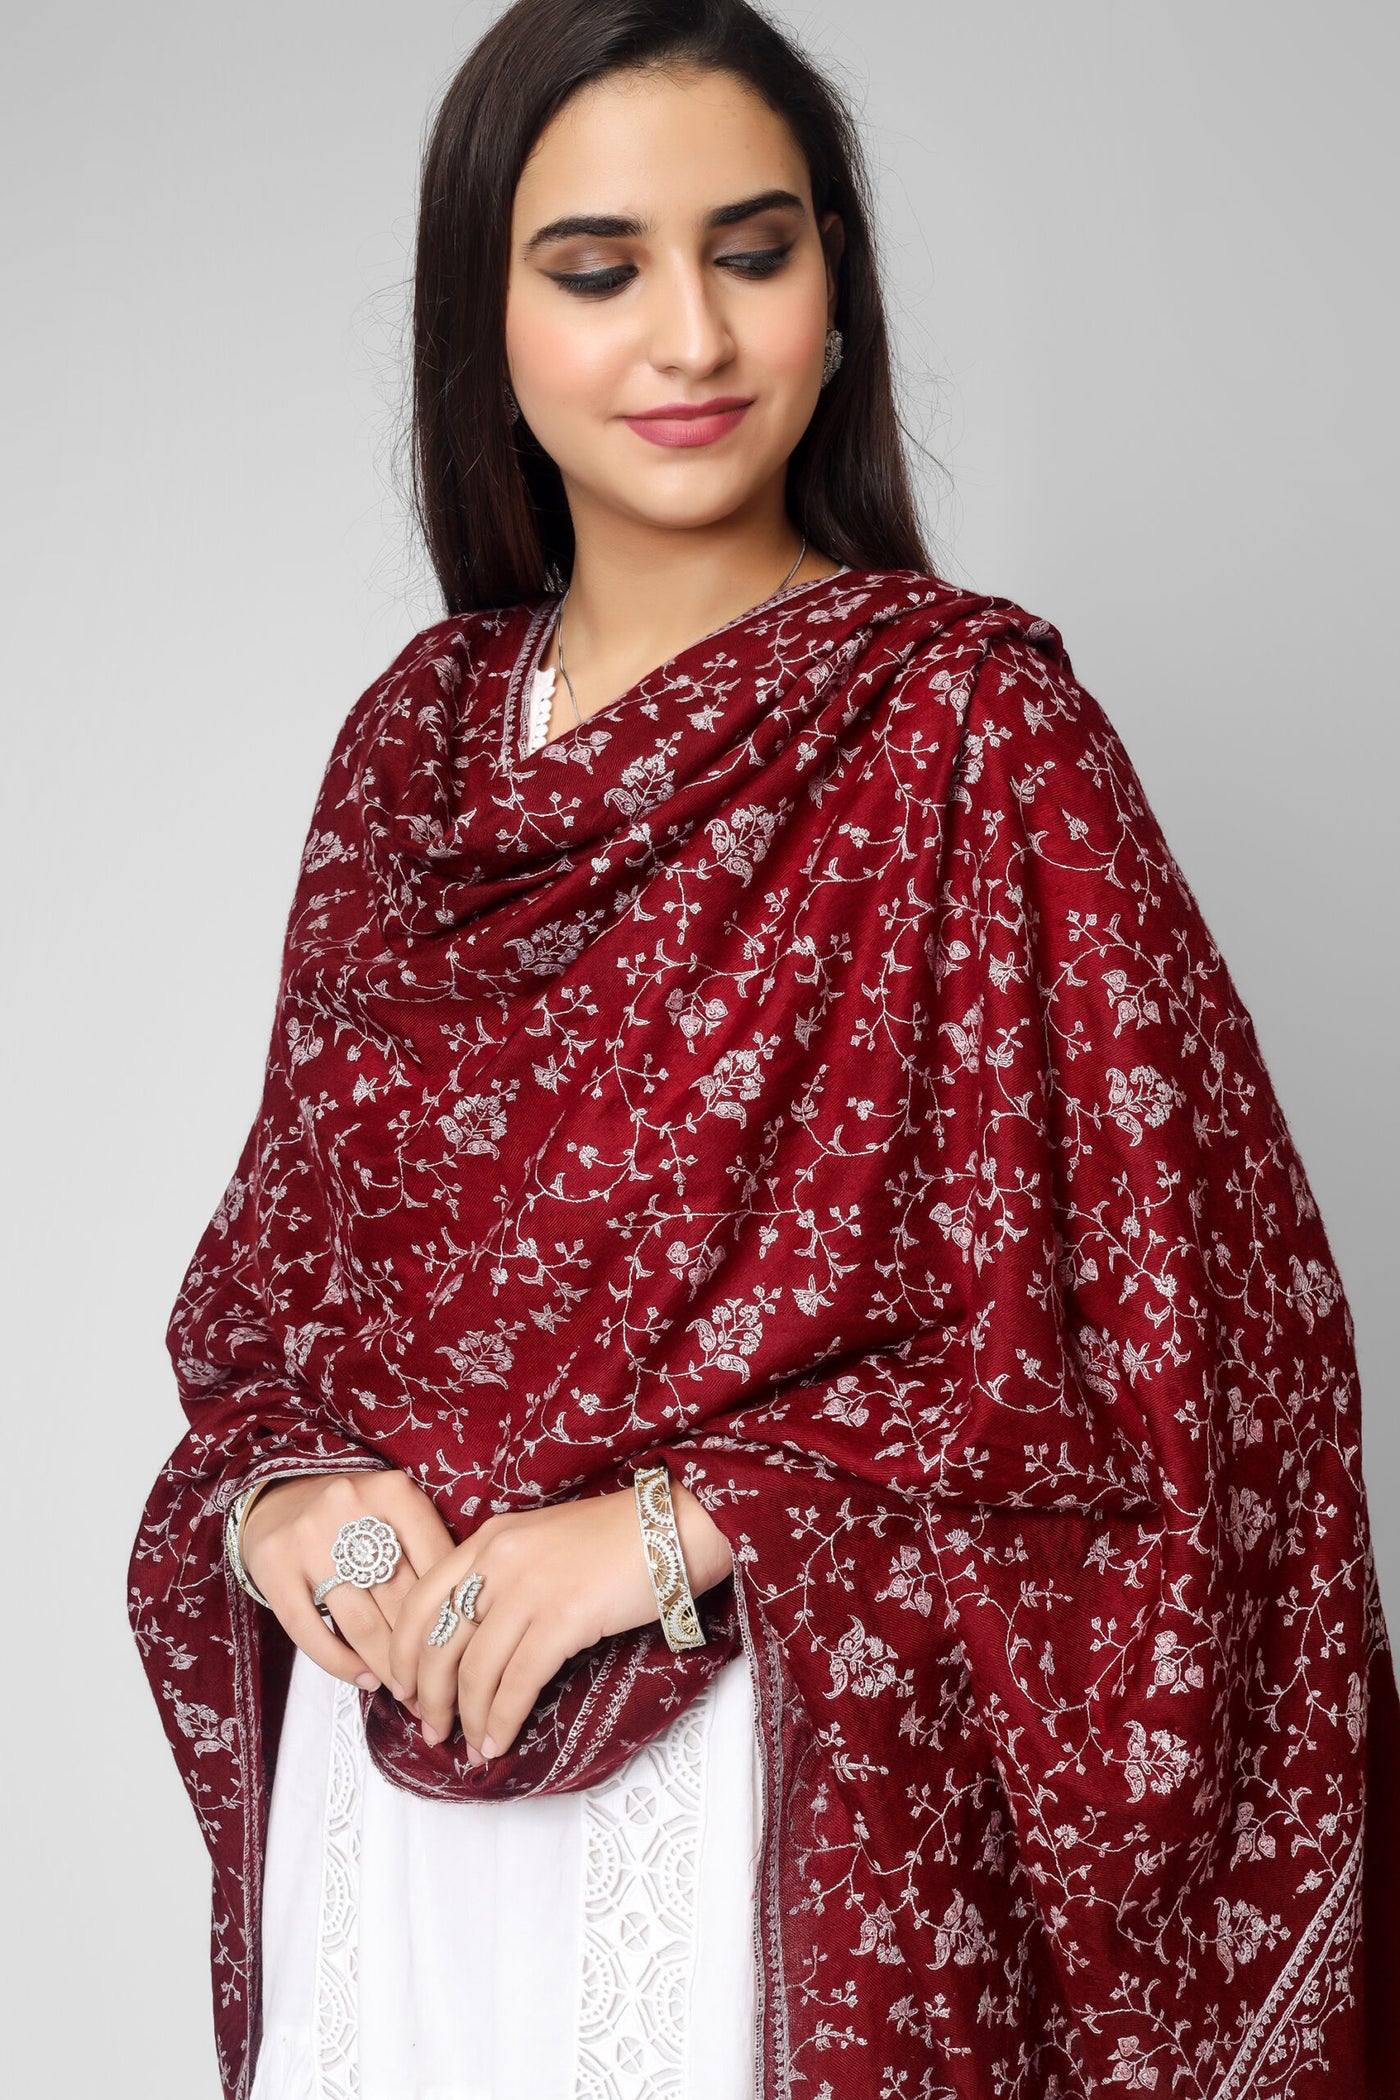 The embroidery is typically done by hand, using a needle and thread in shades of fade gray, which creates a beautiful and subtle contrast against the deep maroon color. The result is a stunning and sophisticated shawl that can be worn on special occasions or as a statement piece with any outfit.